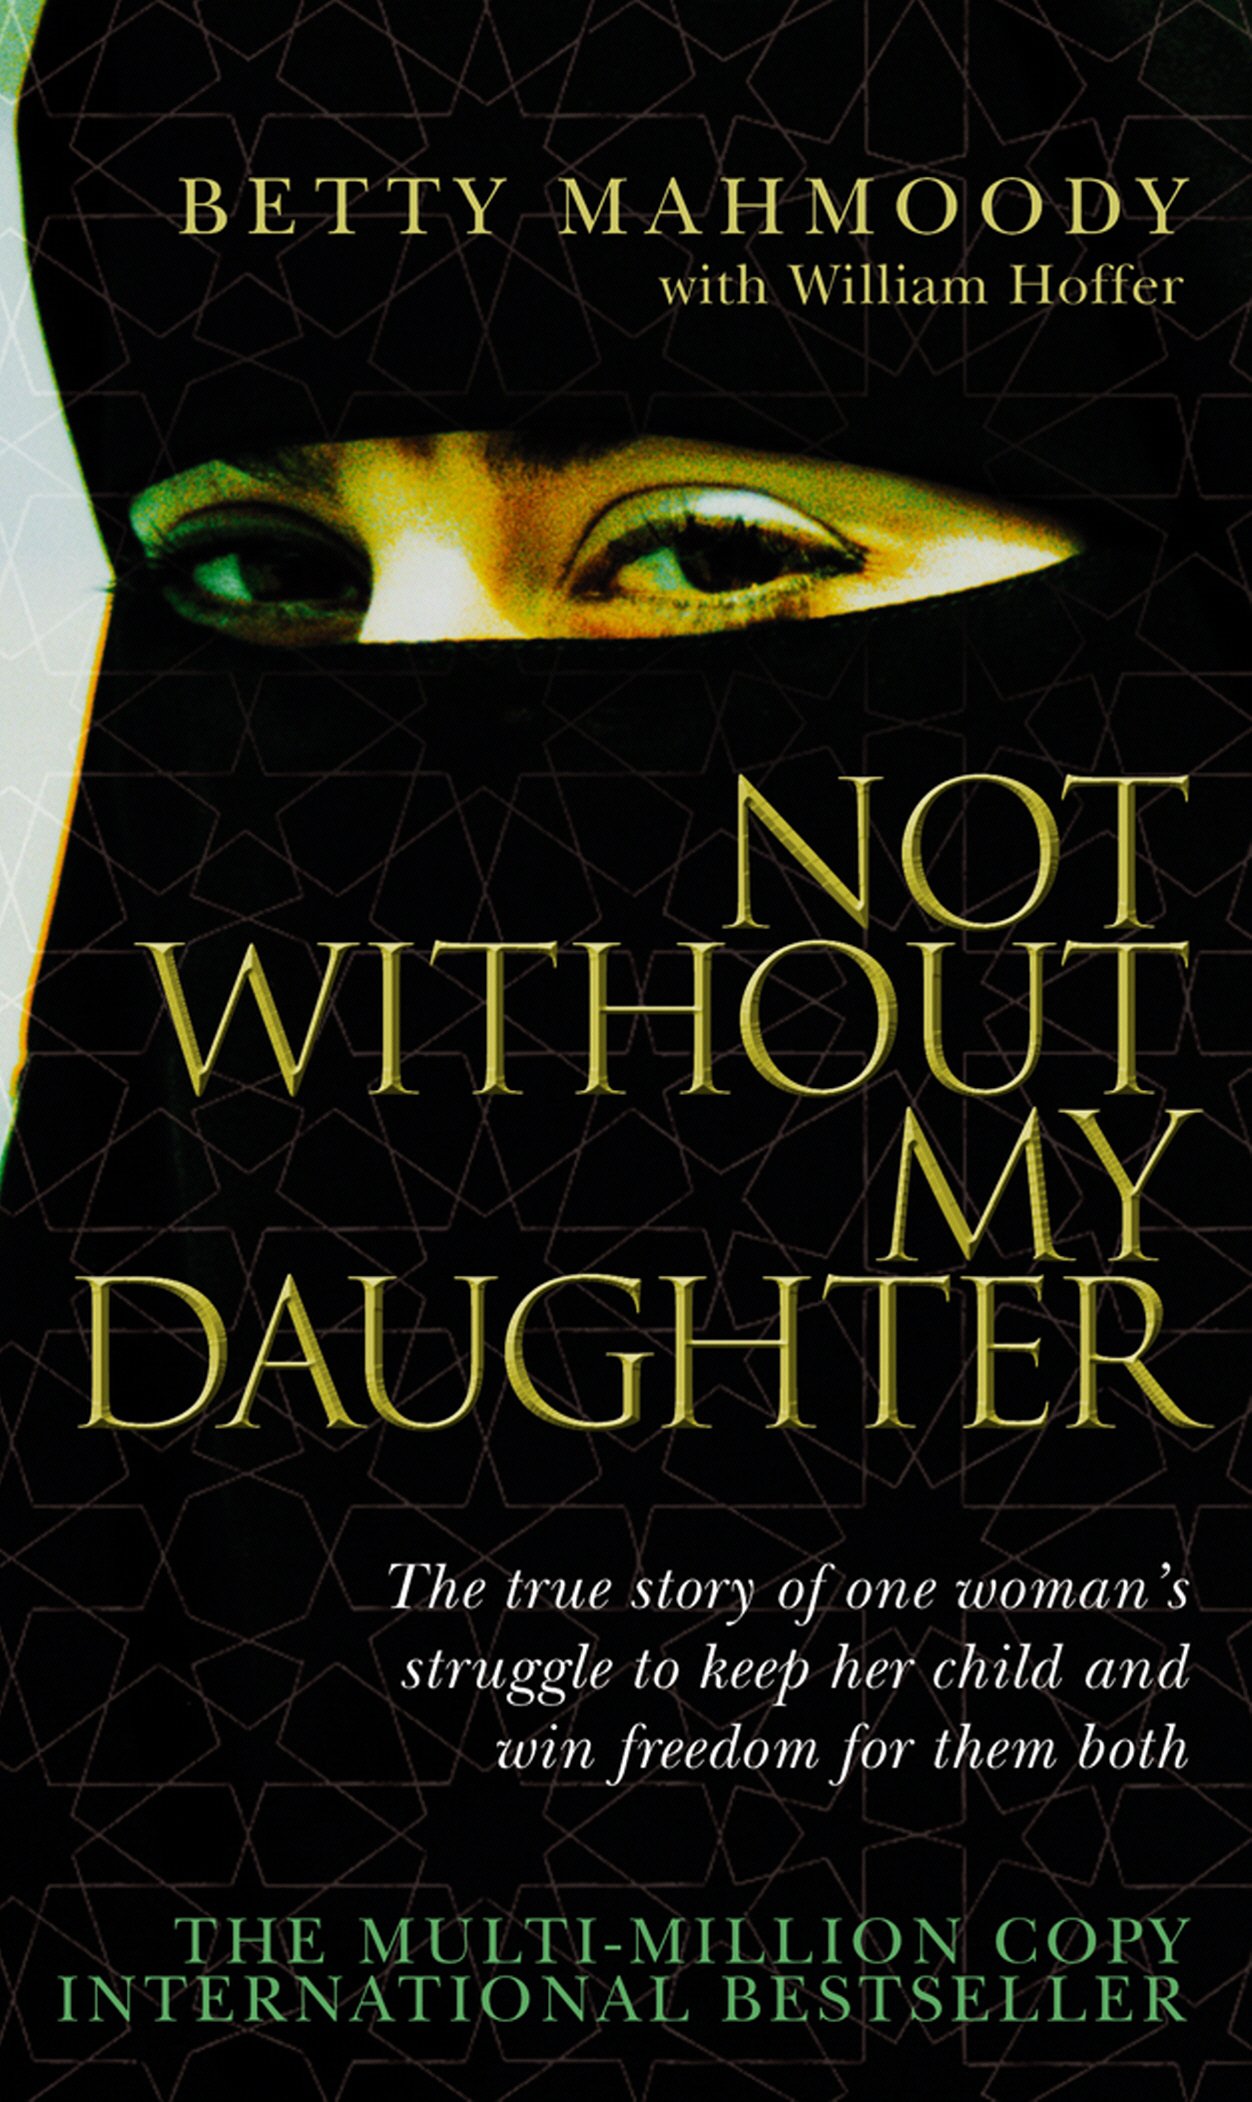 Not Without My Daughter (Amazon)